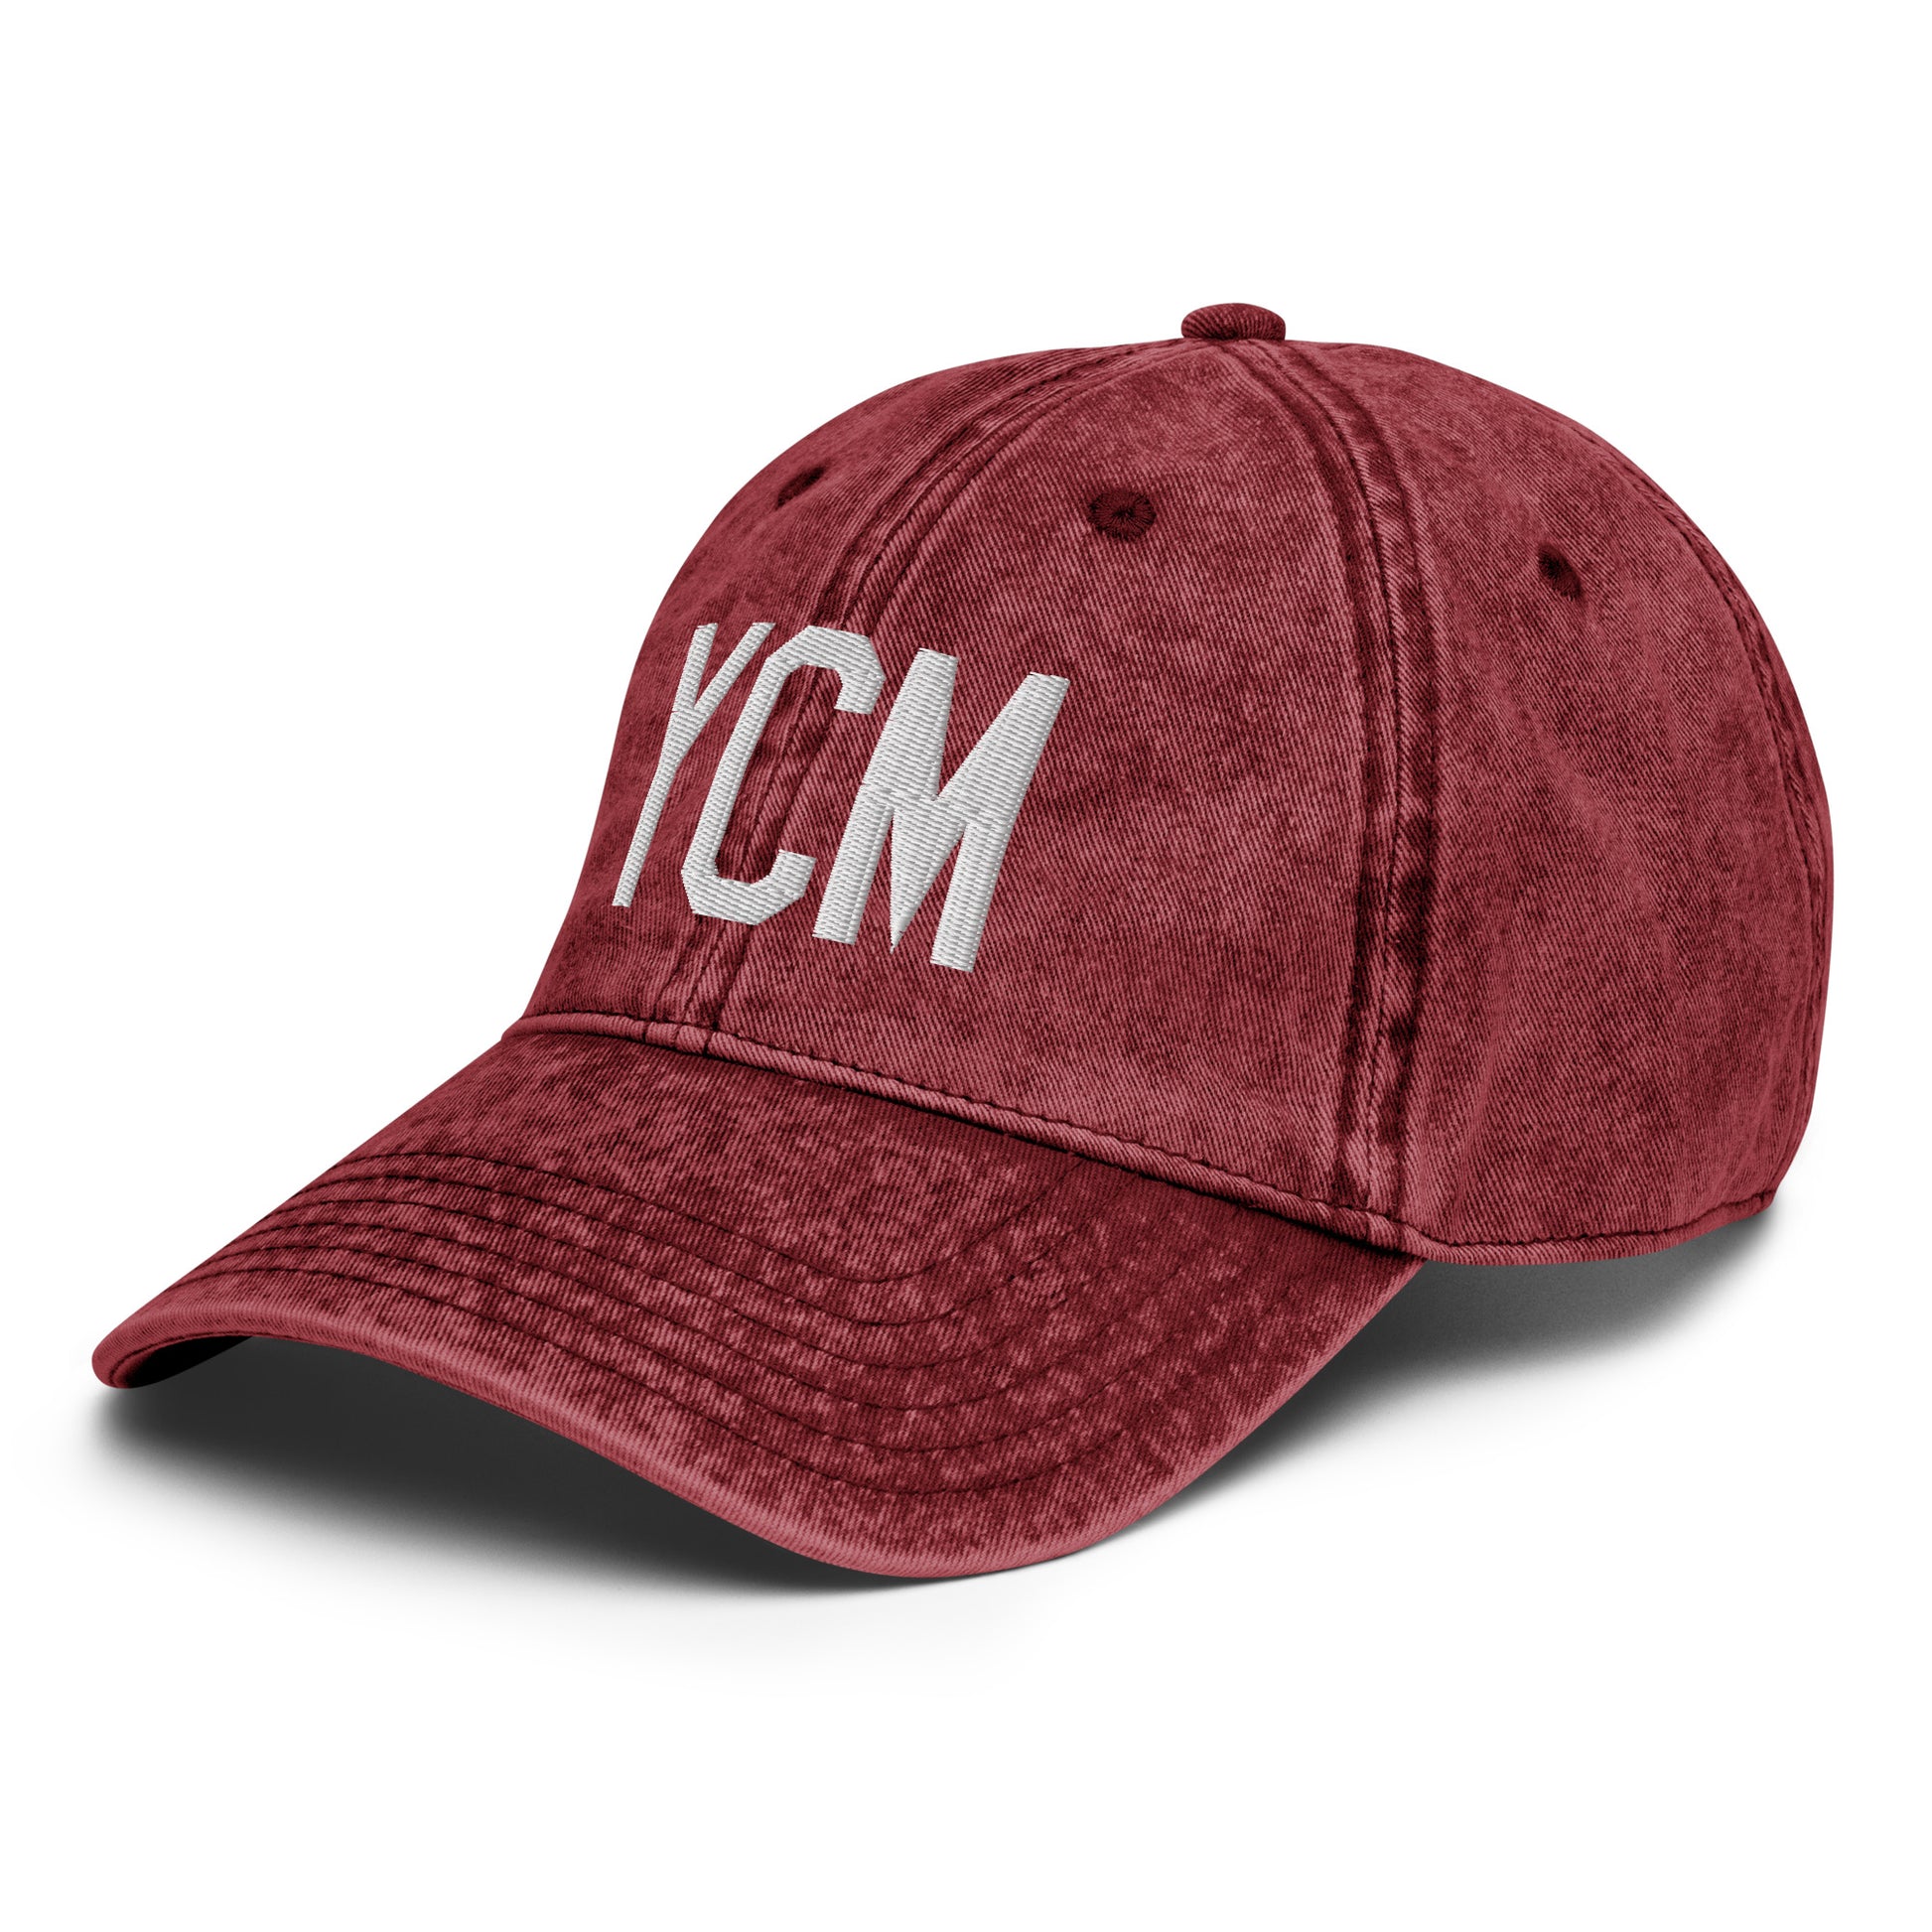 Airport Code Twill Cap - White • YCM St. Catharines • YHM Designs - Image 20